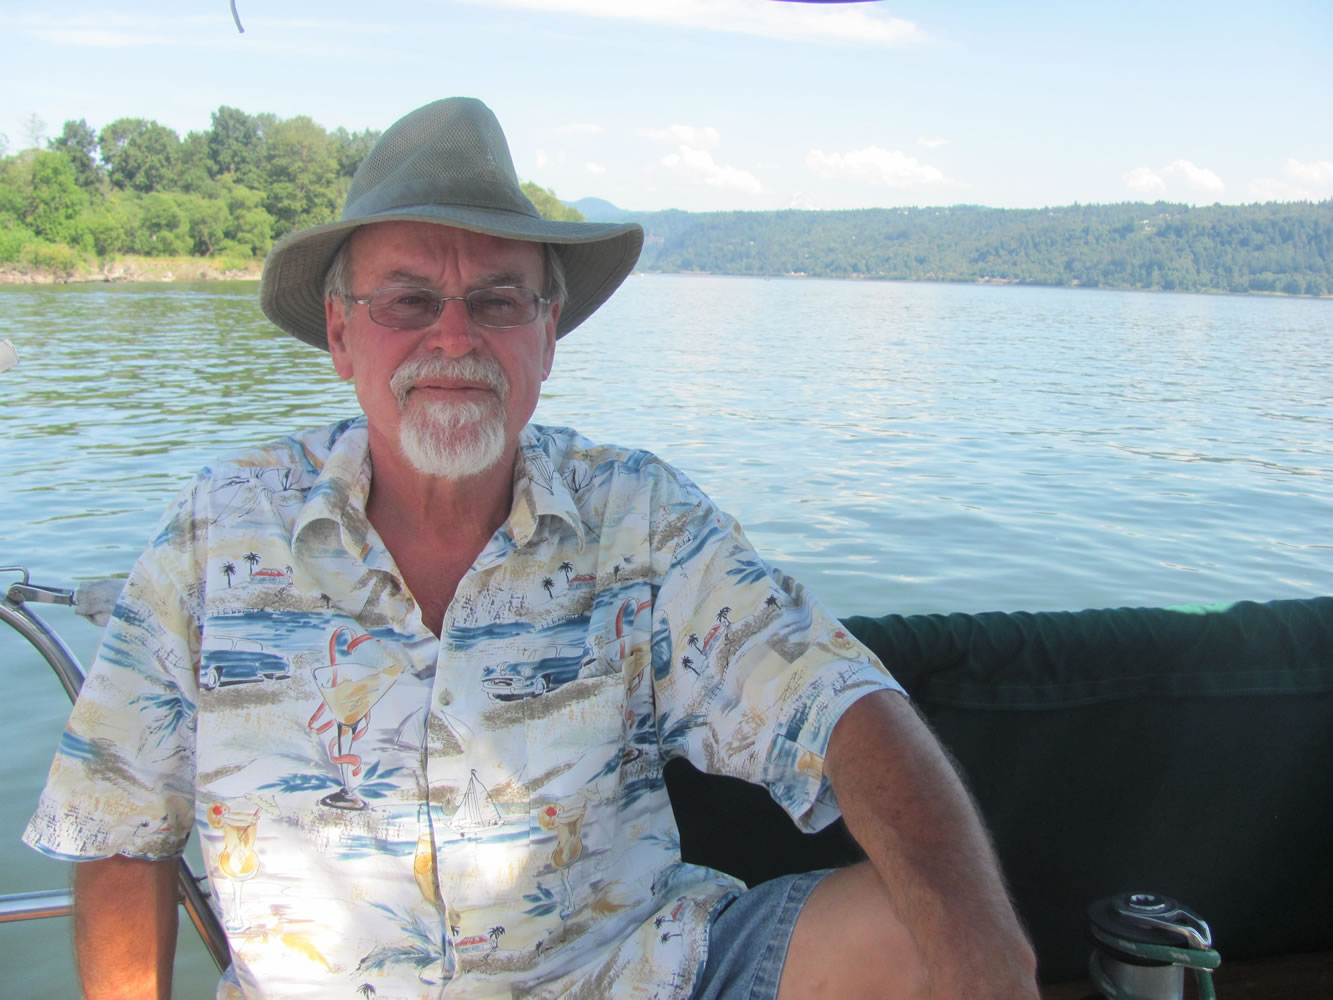 Longtime sailor John Wagoner hopes to inspire local youth to enjoy boating. &quot;This really is a paradise,&quot; he said, regarding the Columbia River.